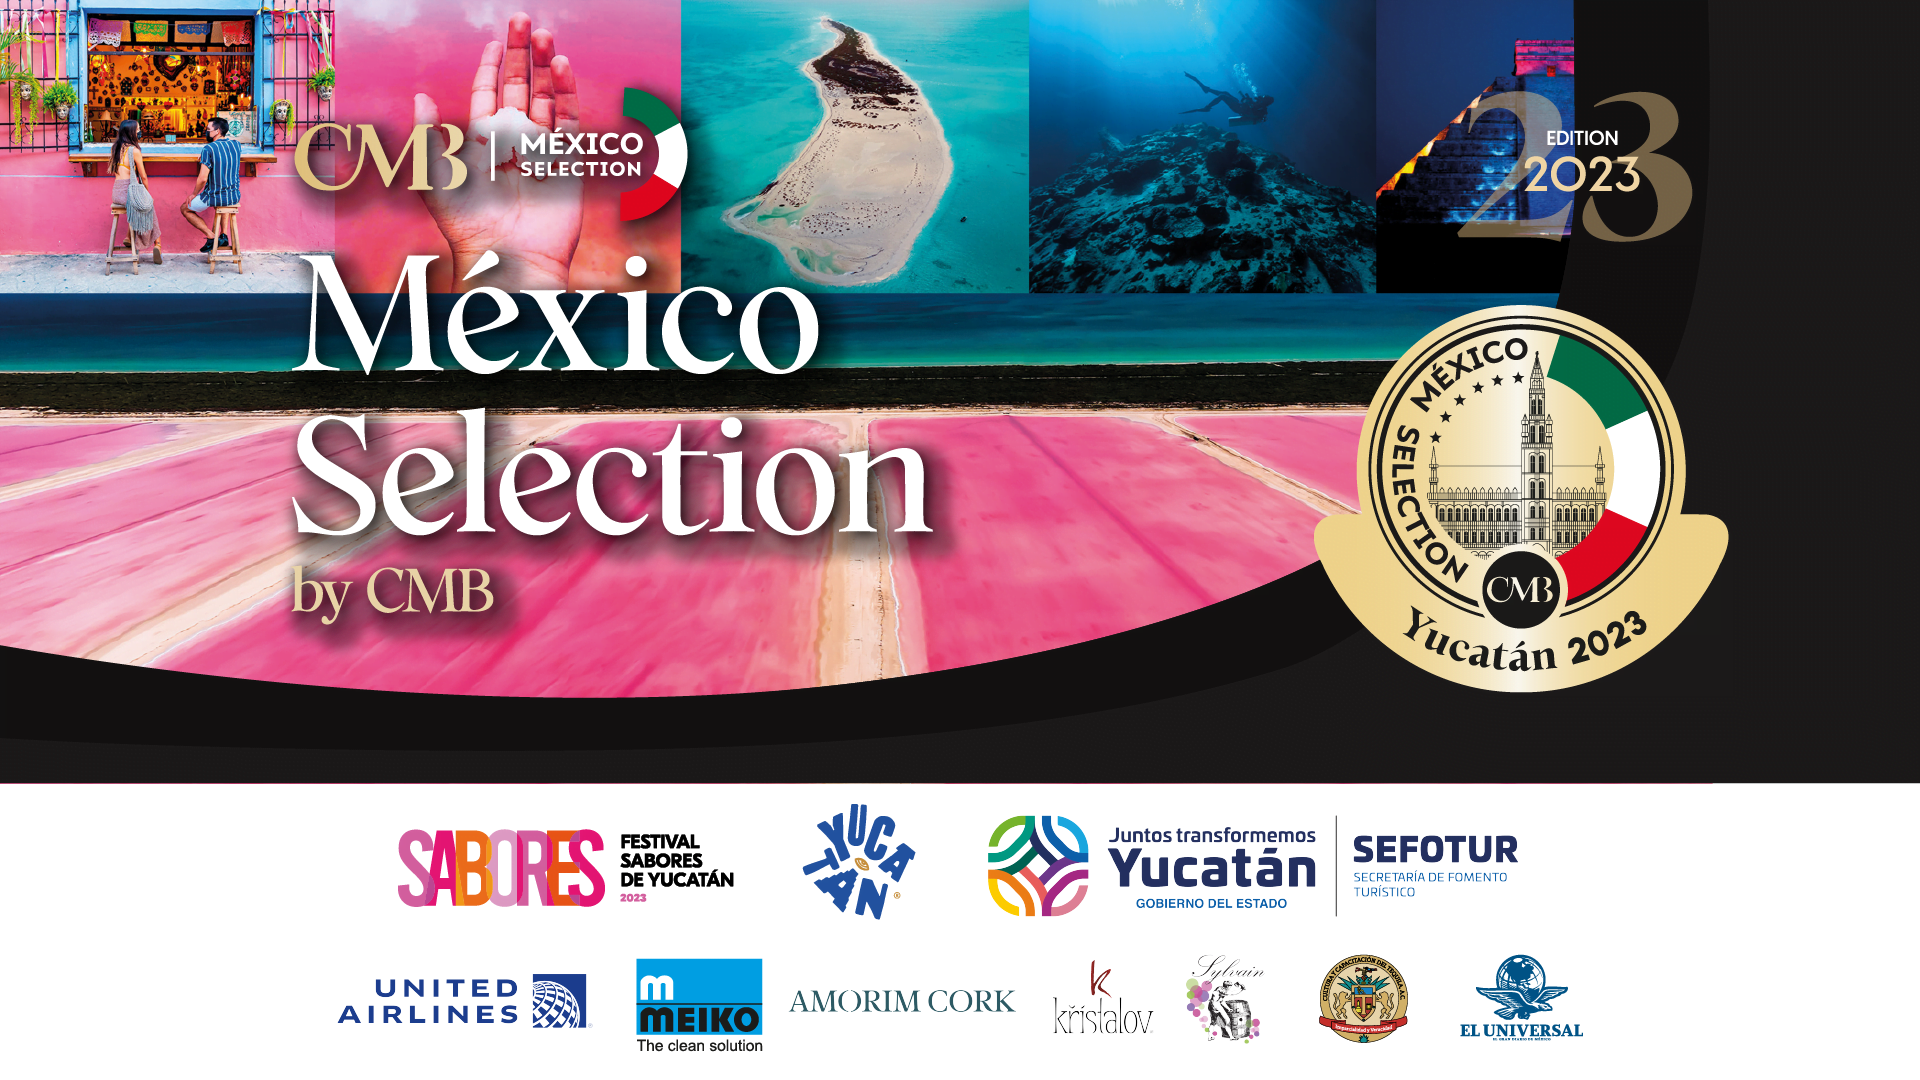 México Selection by CMB Yucatán 2023: the largest blind tasting of Mexican wines and spirits ever held!